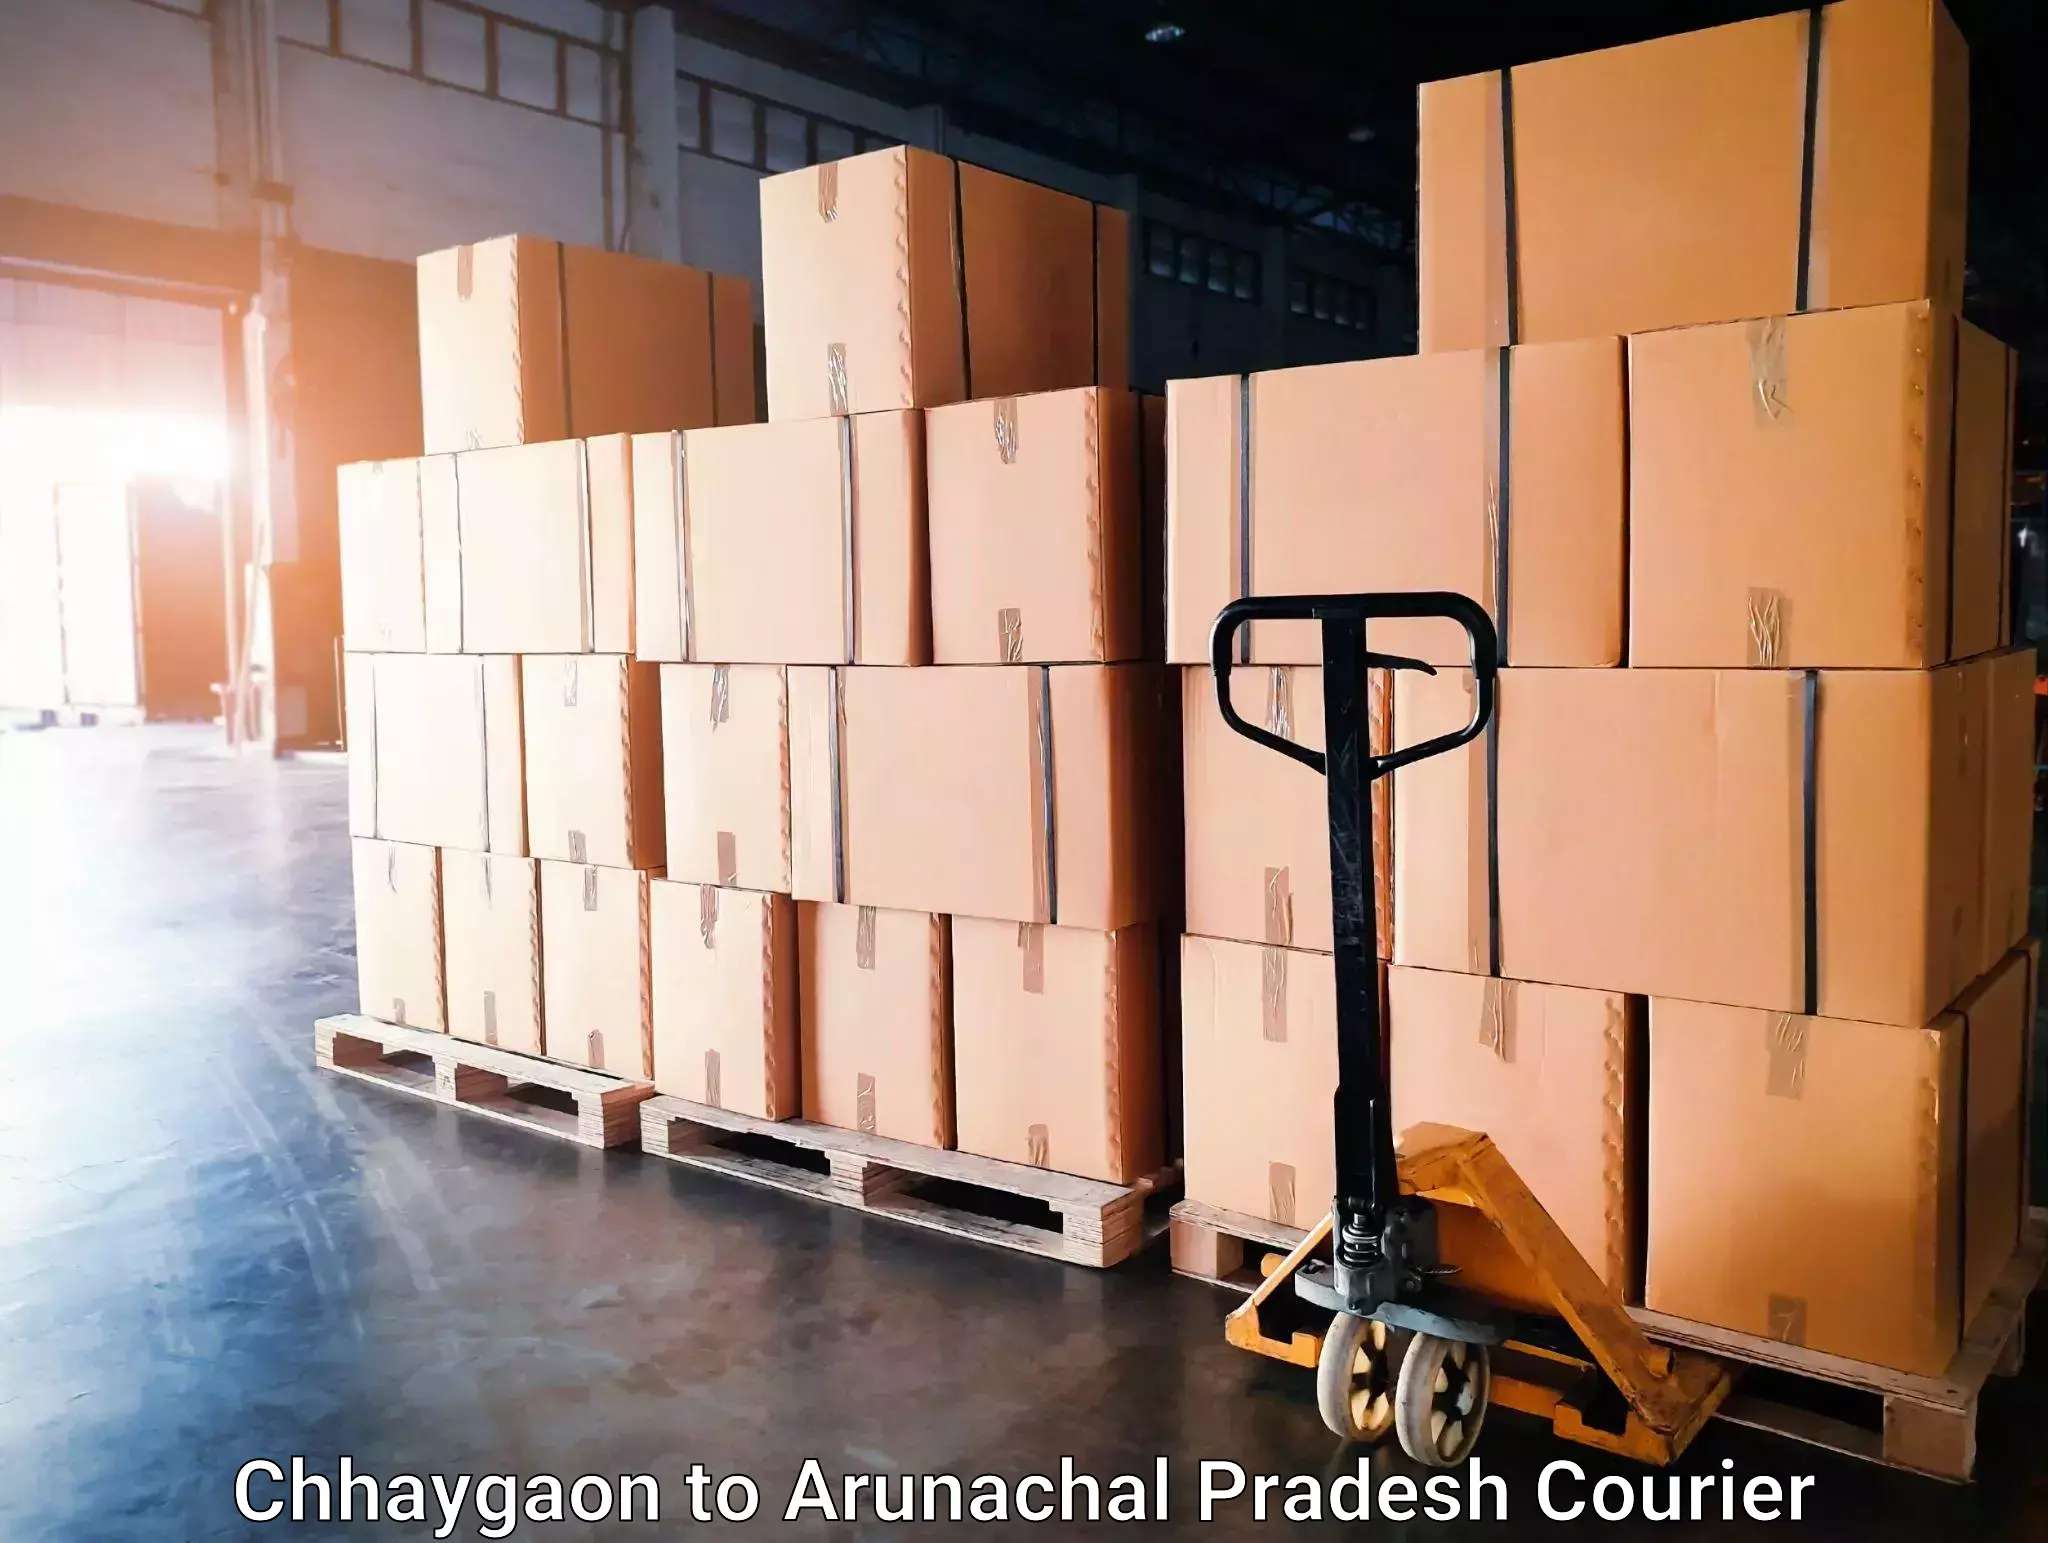 Courier service innovation Chhaygaon to Aalo